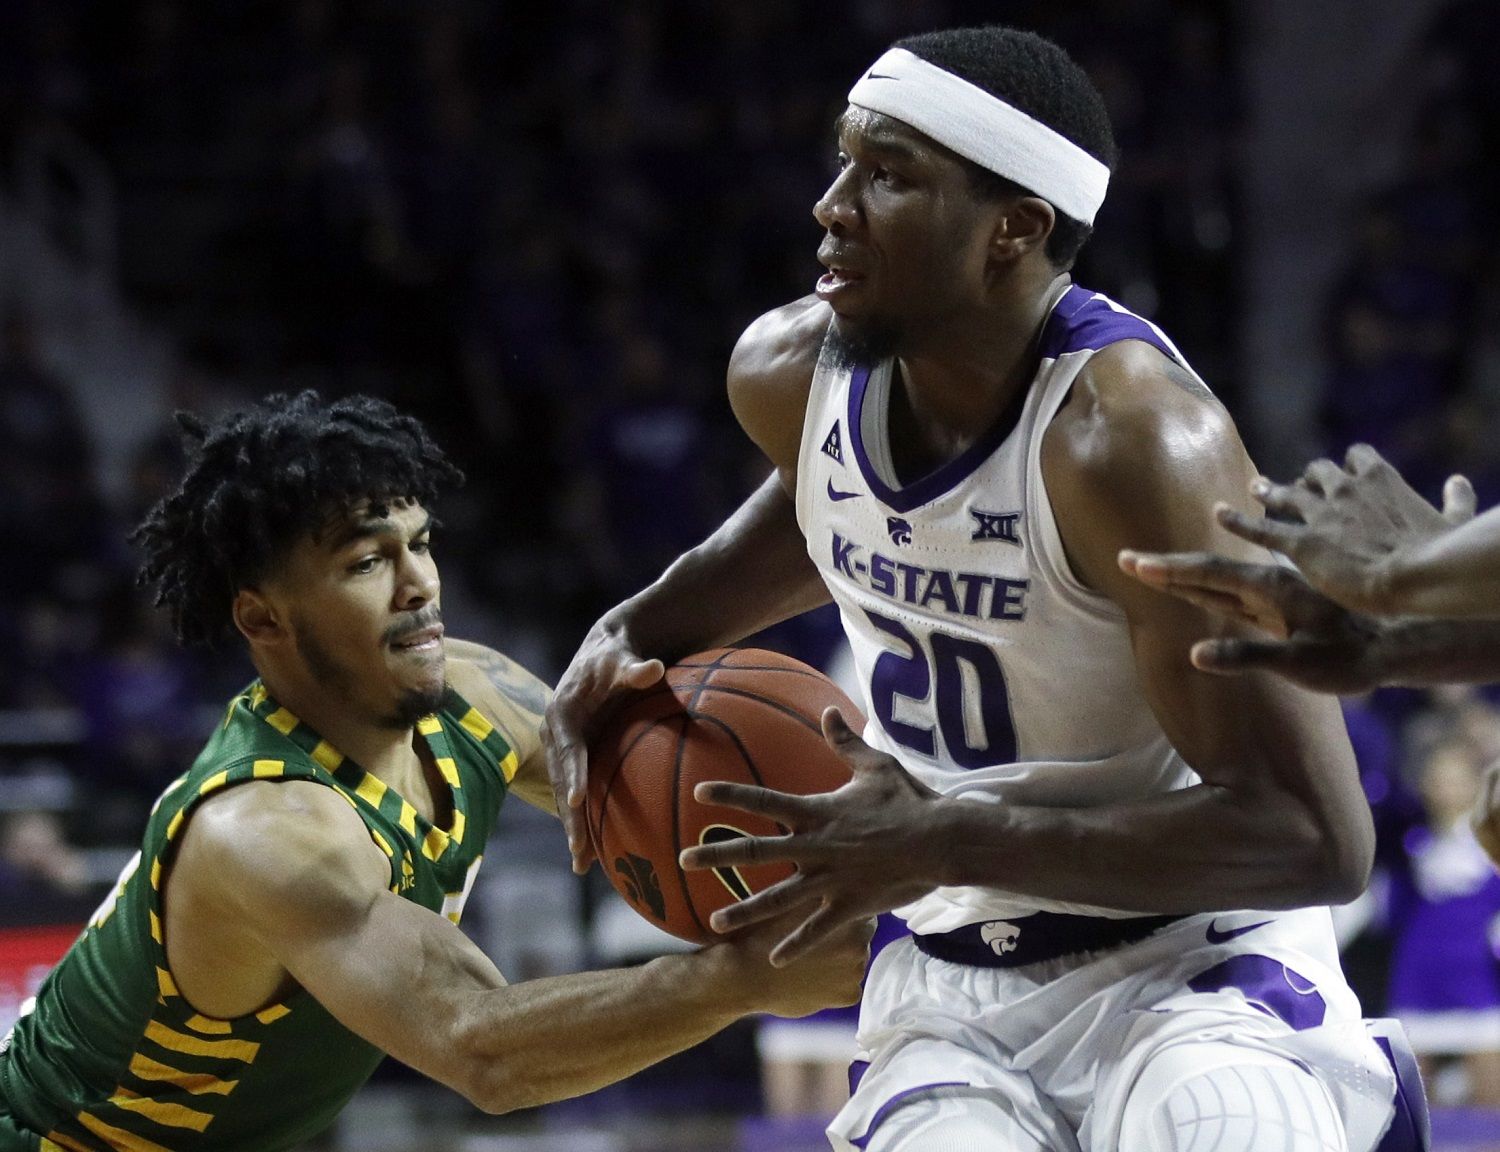 George Mason guard Otis Livingston II, left, steals the ball from Kansas State forward Xavier Sneed (20) during the second half of an NCAA college basketball game in Manhattan, Kan., Saturday, Dec. 29, 2018. (AP Photo/Orlin Wagner)